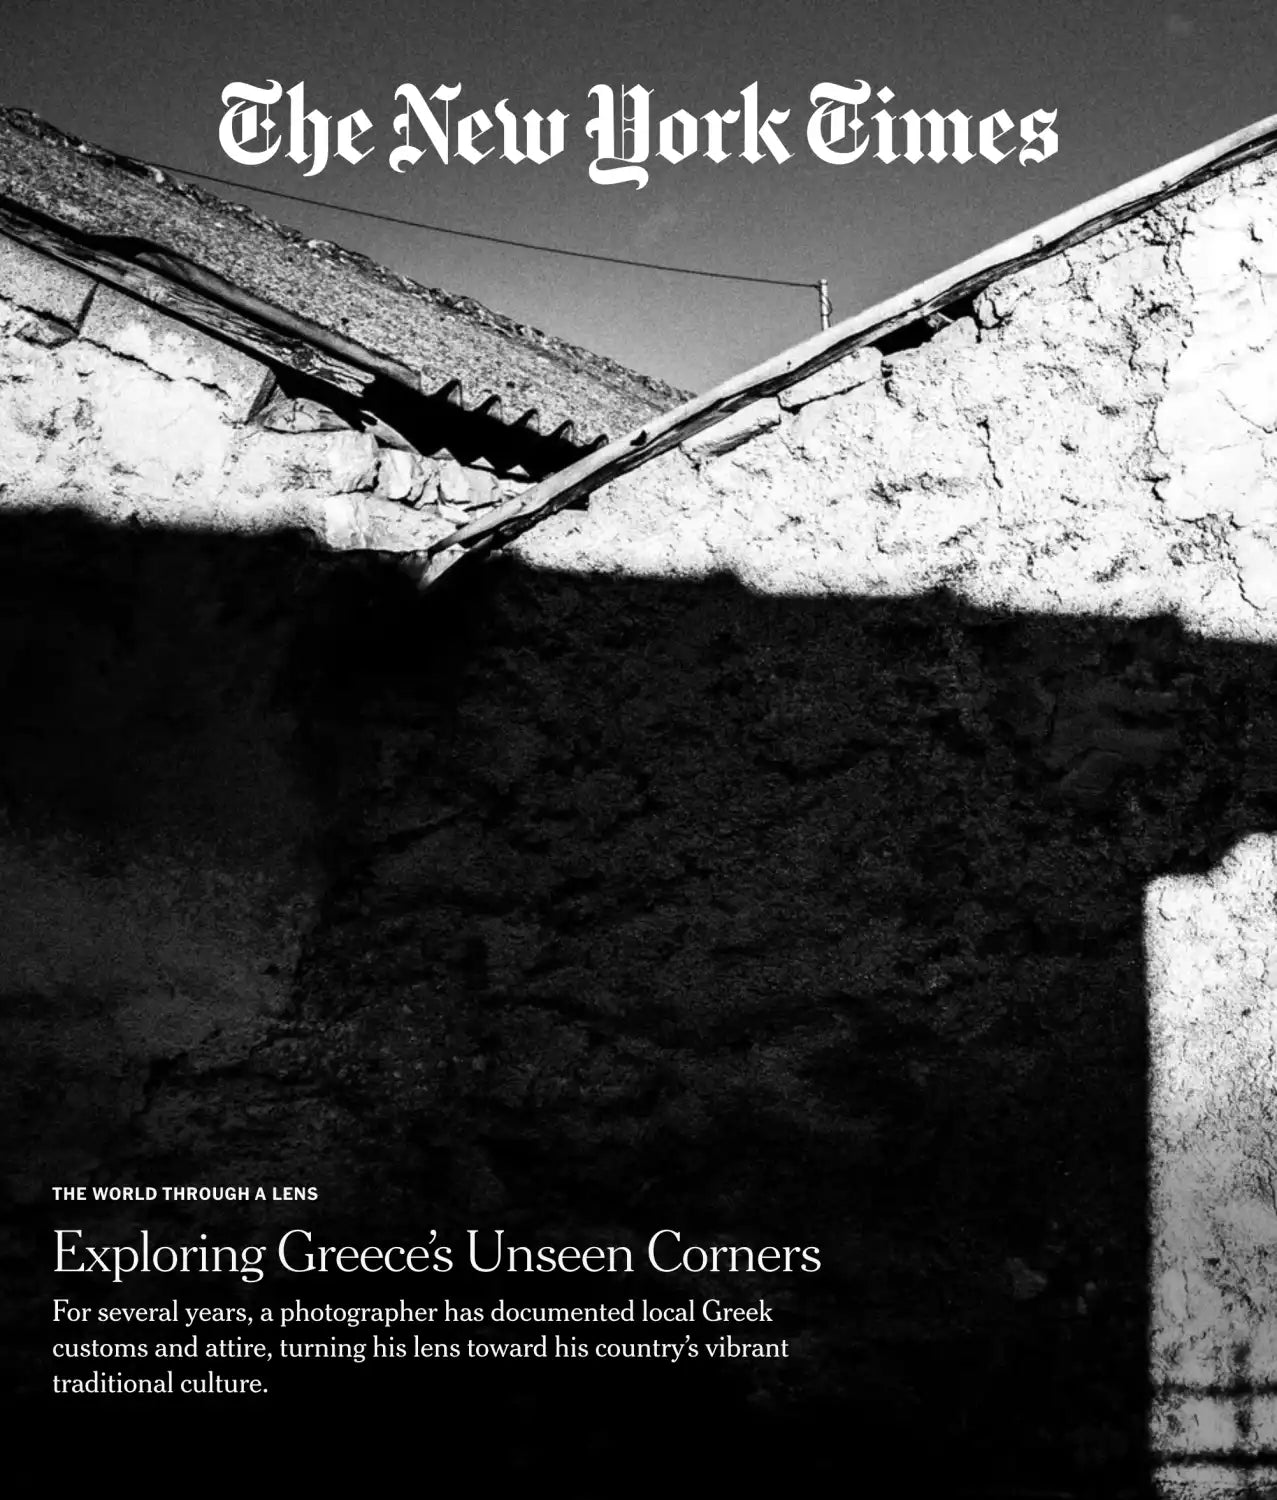 George Tatakis published on the New York Times